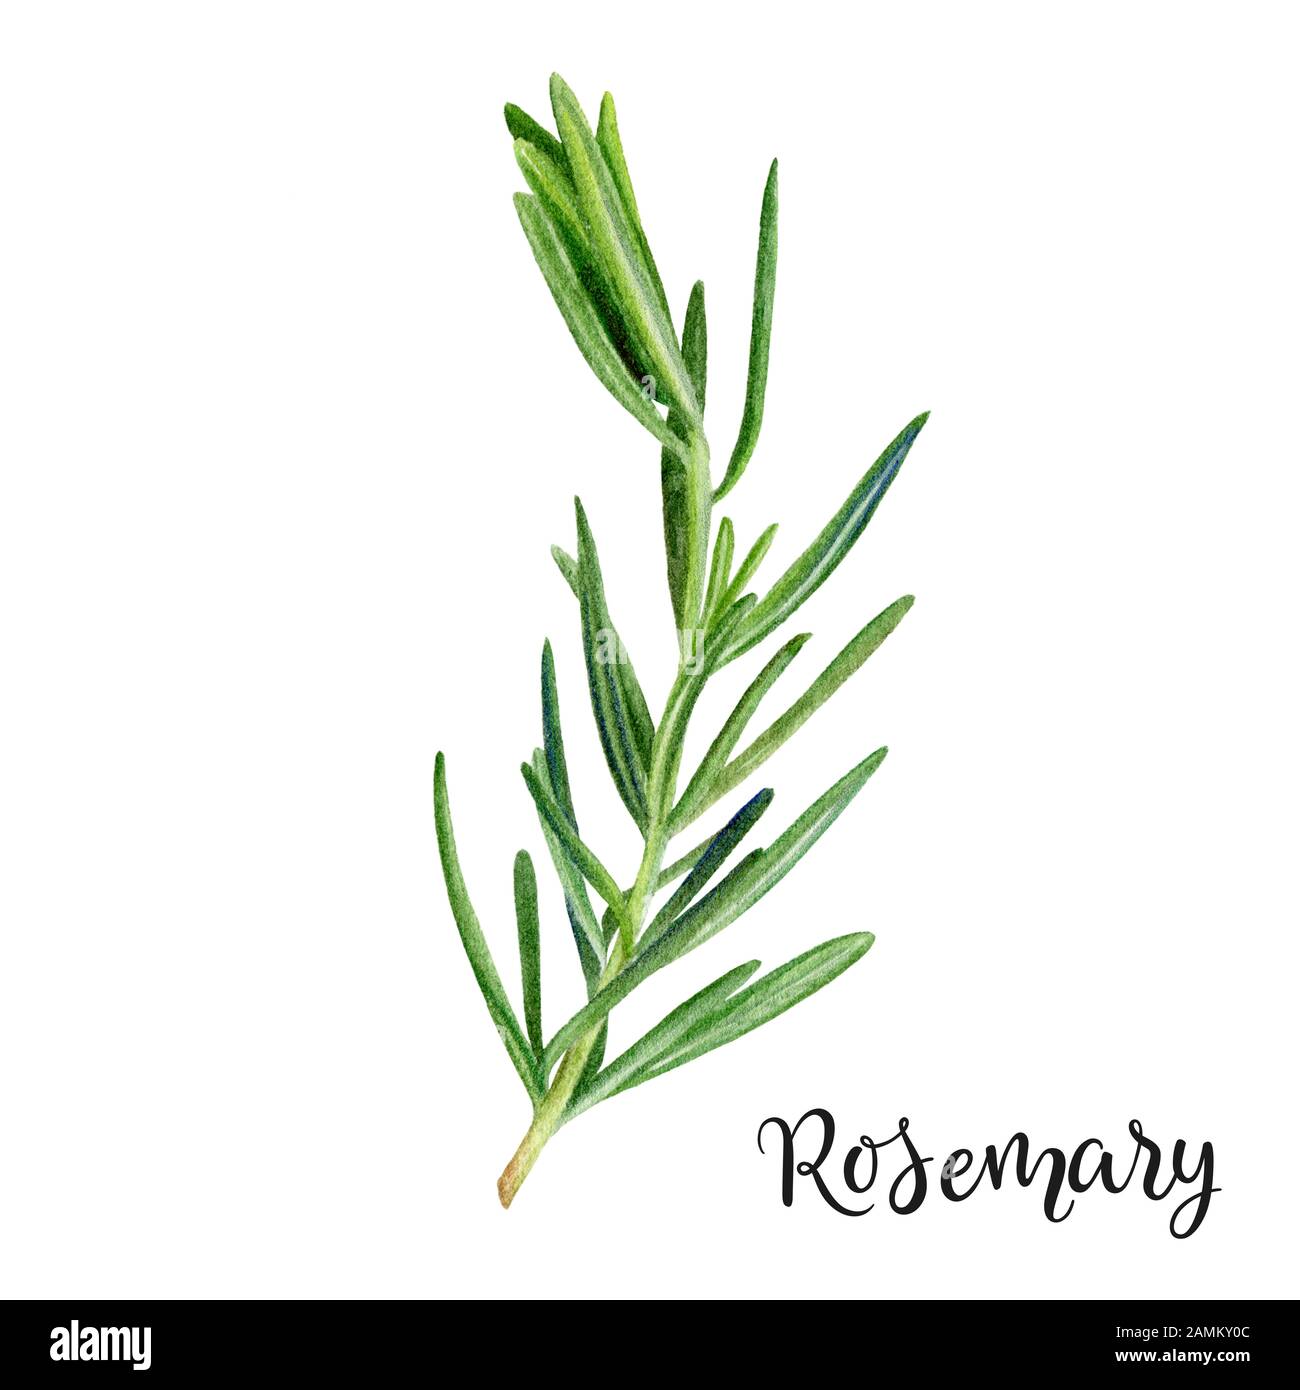 Rosemary herb watercolor isolated on white background Stock Photo